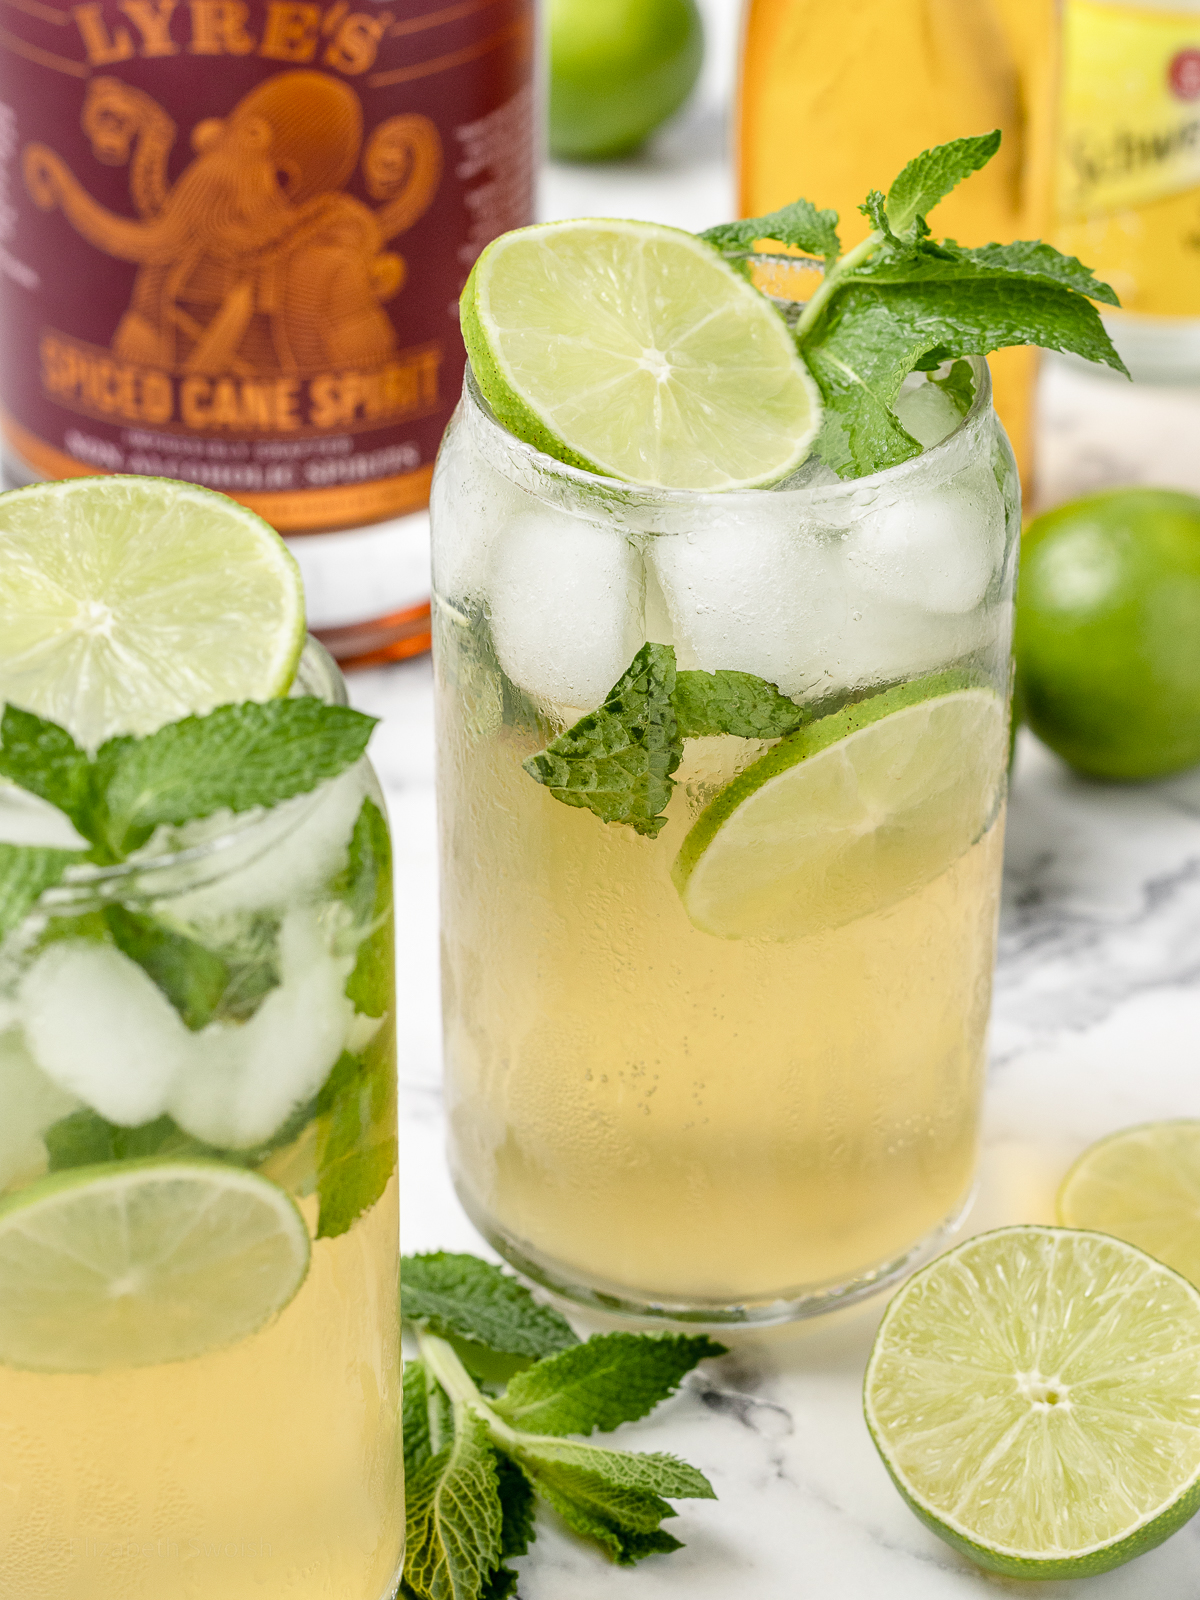 A Mint Mojito Mocktail garnished with lime slices and mint leaves. A bottle of zero proof spiced rum, agave syrup, and tonic water on the side.